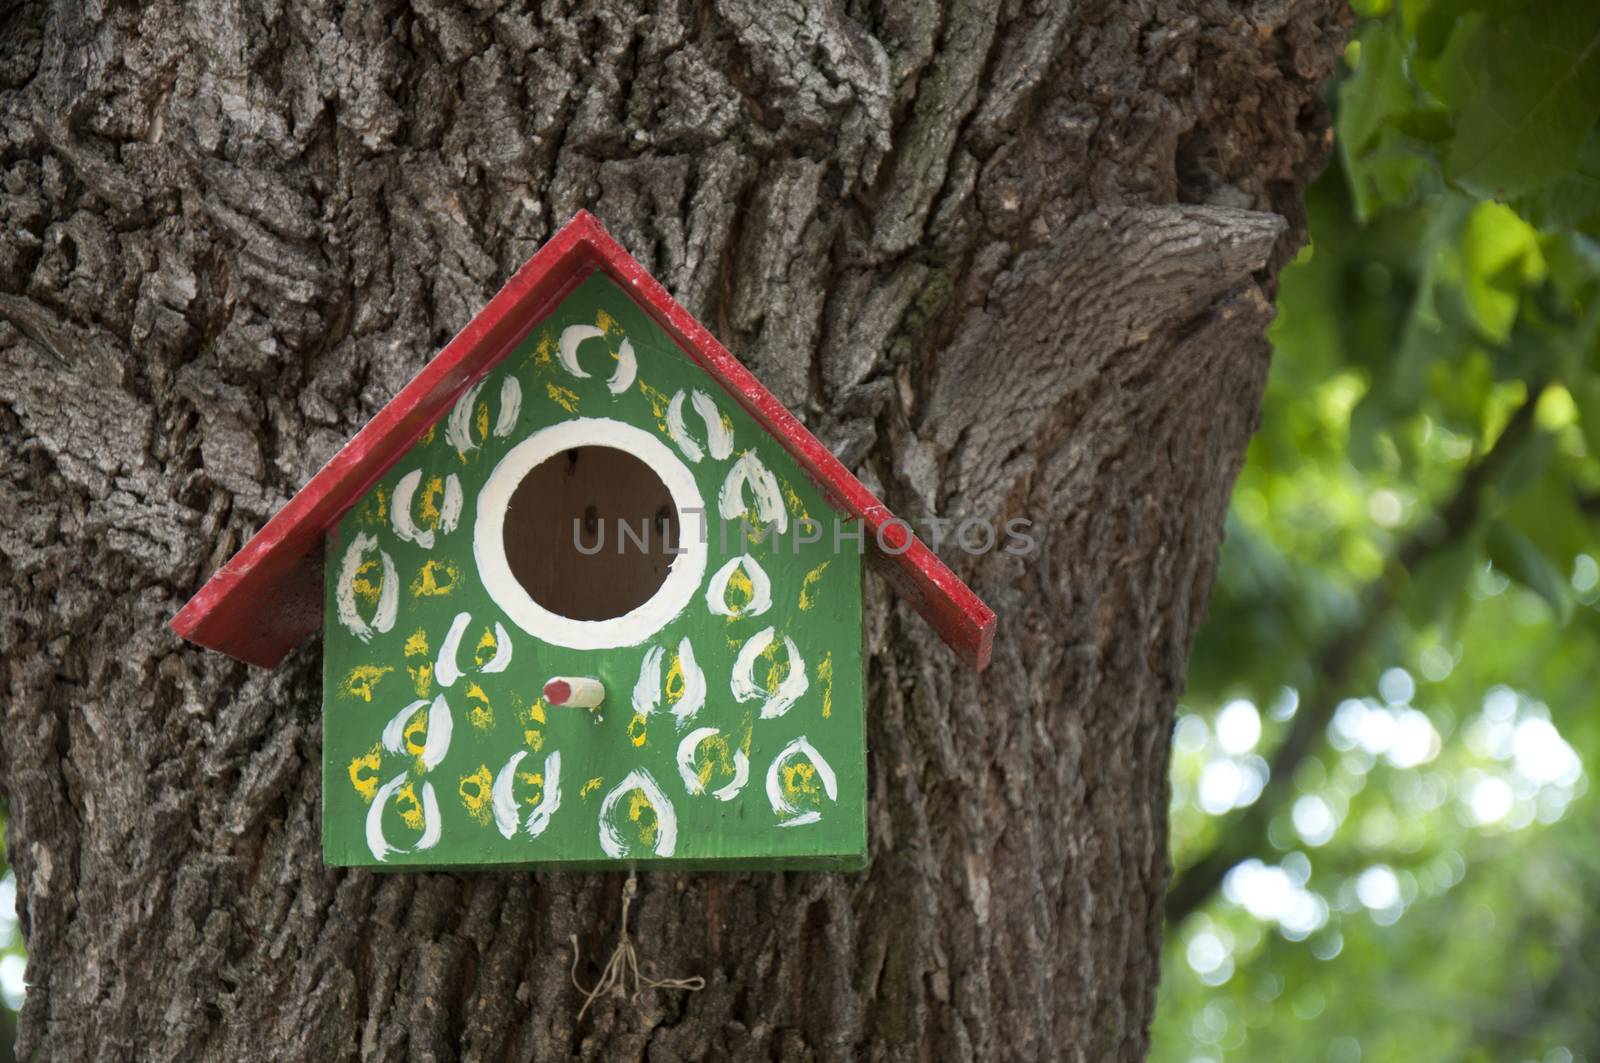 Home-made bright colored bird house. Space for text or other content